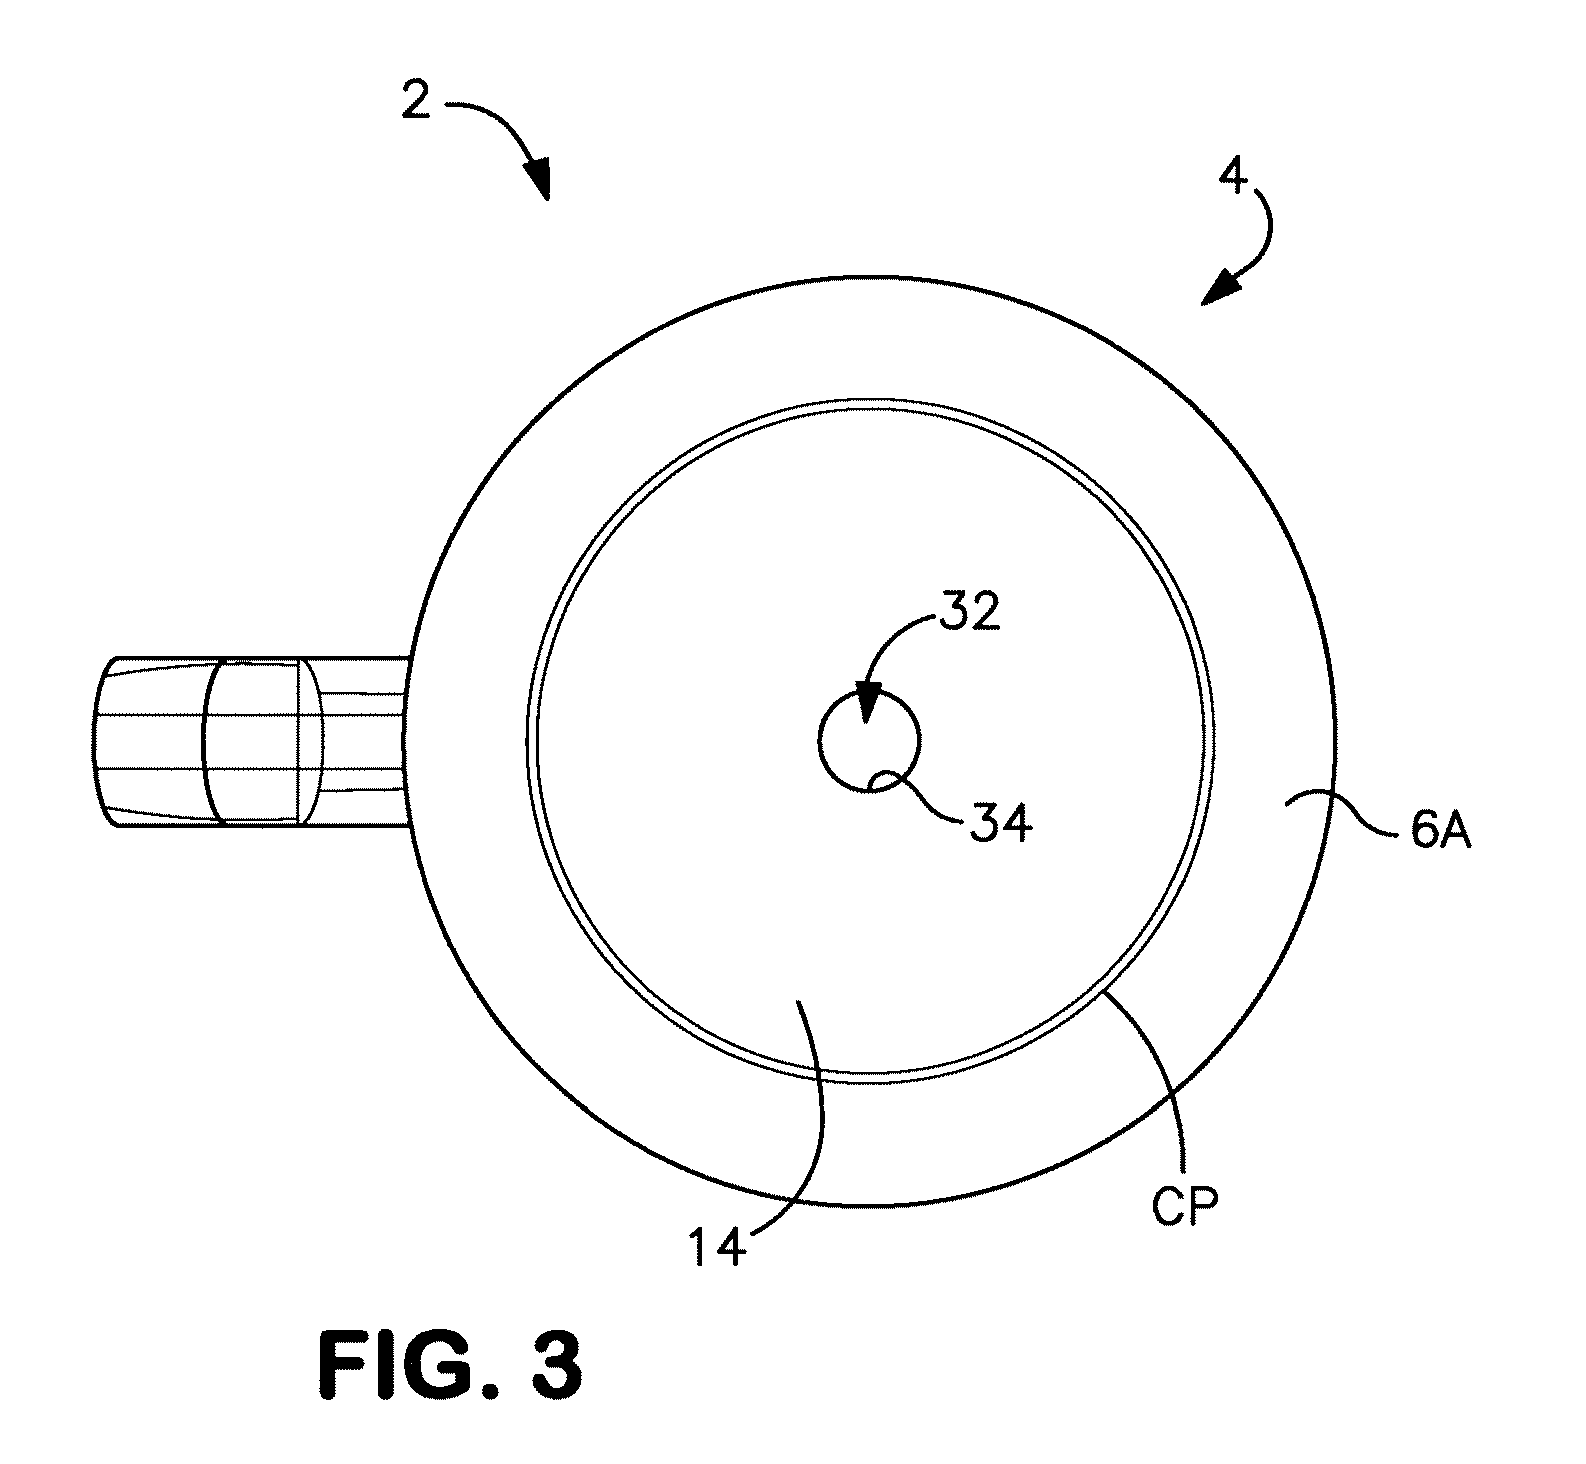 Self-anchoring beverage container with directional release and attachment capability